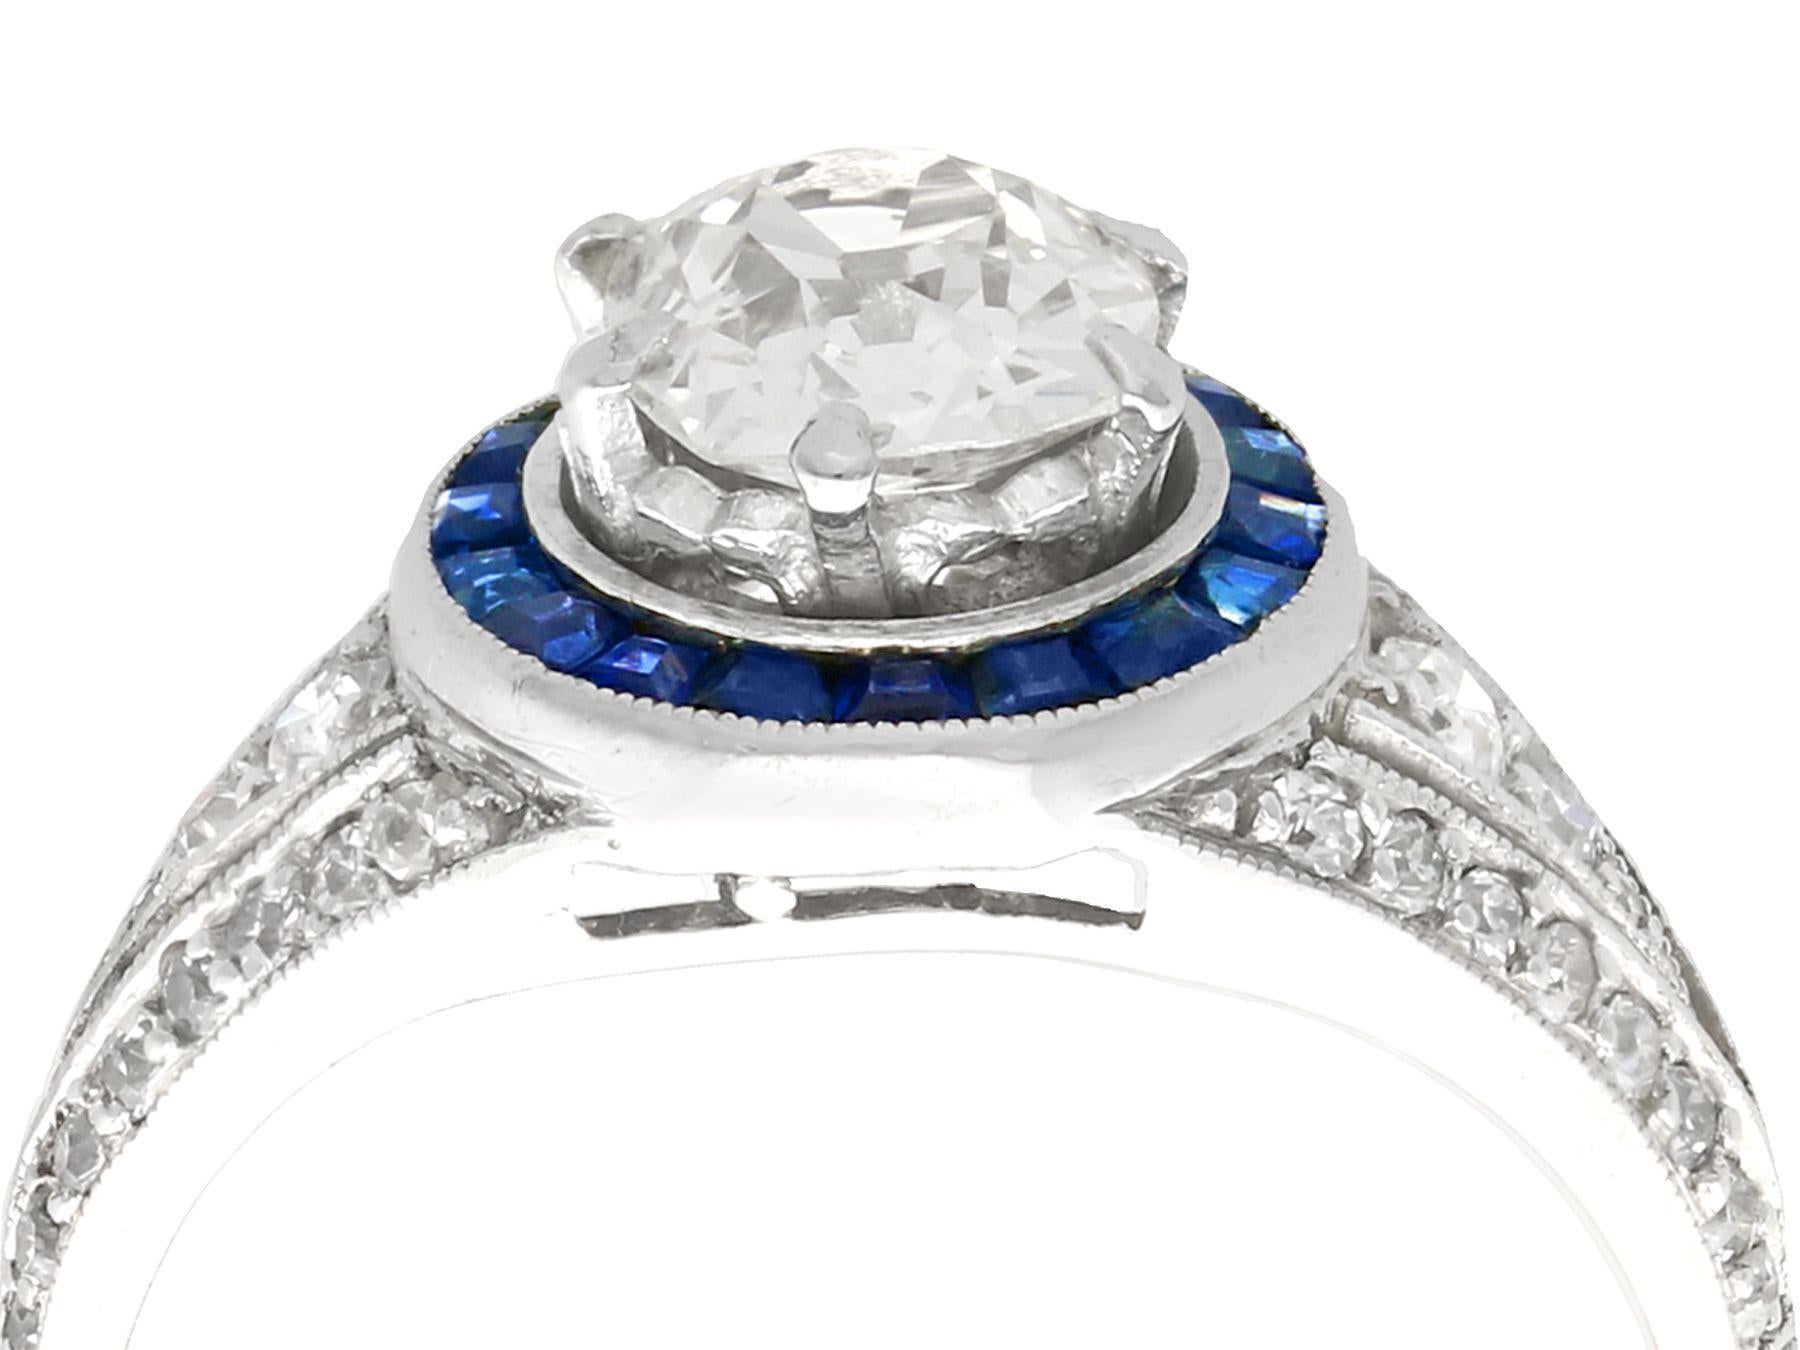 A stunning, fine and impressive antique 1930s 2.59 carat (total) Old European cut diamond, 0.48 carat sapphire and platinum cocktail ring; part of our diverse antique jewelry and estate jewelry collections.

This stunning antique diamond ring has